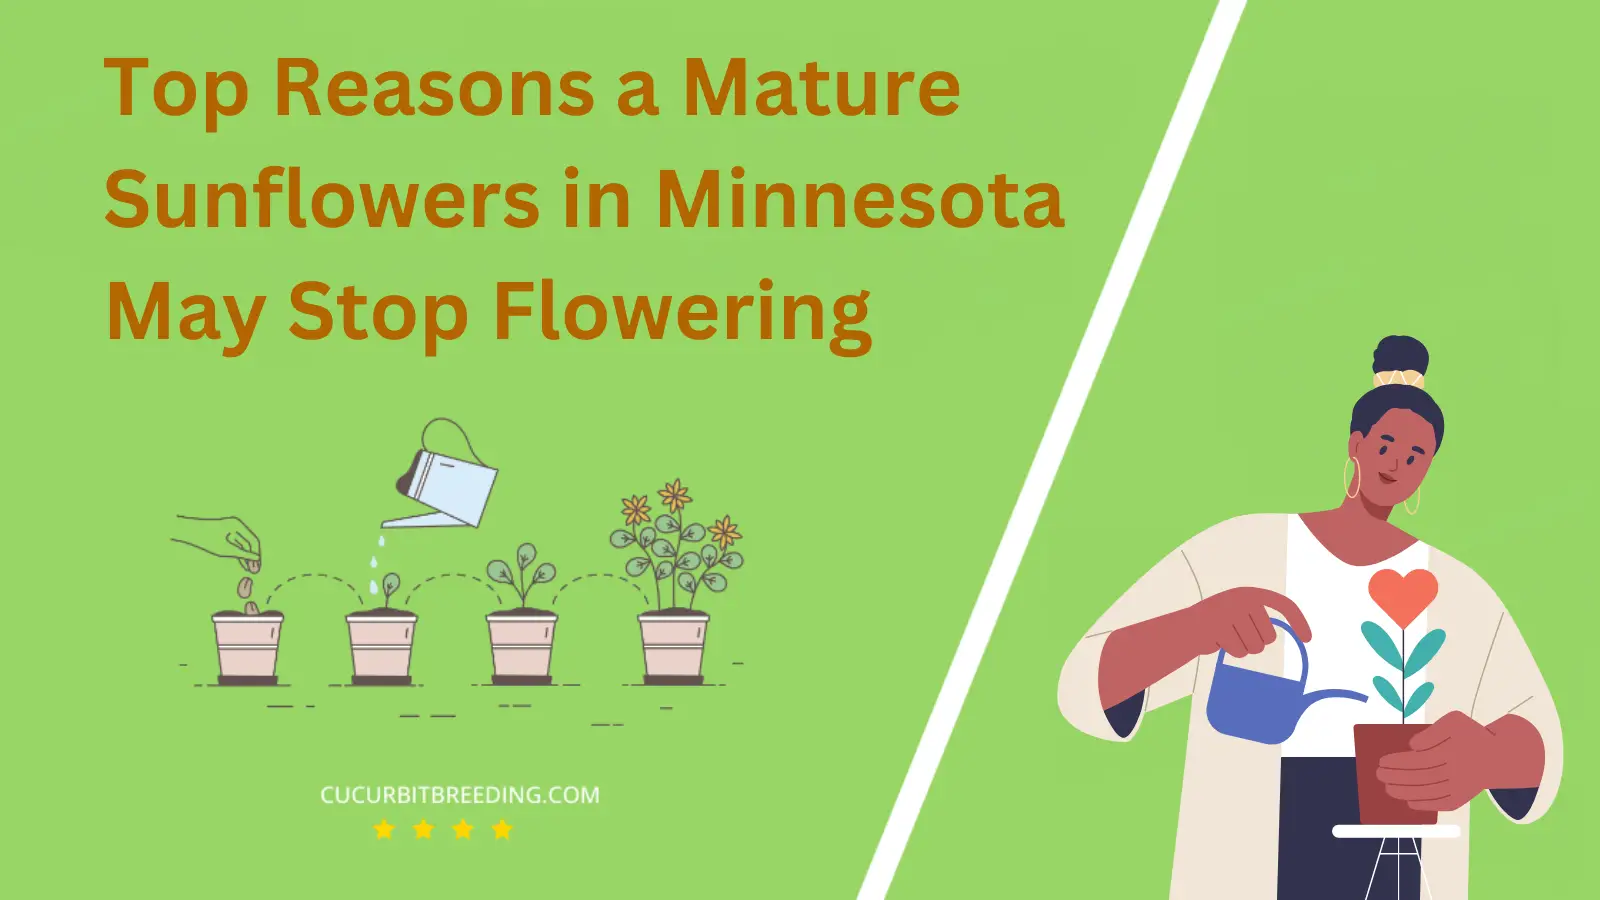 Top Reasons a Mature Sunflowers in Minnesota May Stop Flowering